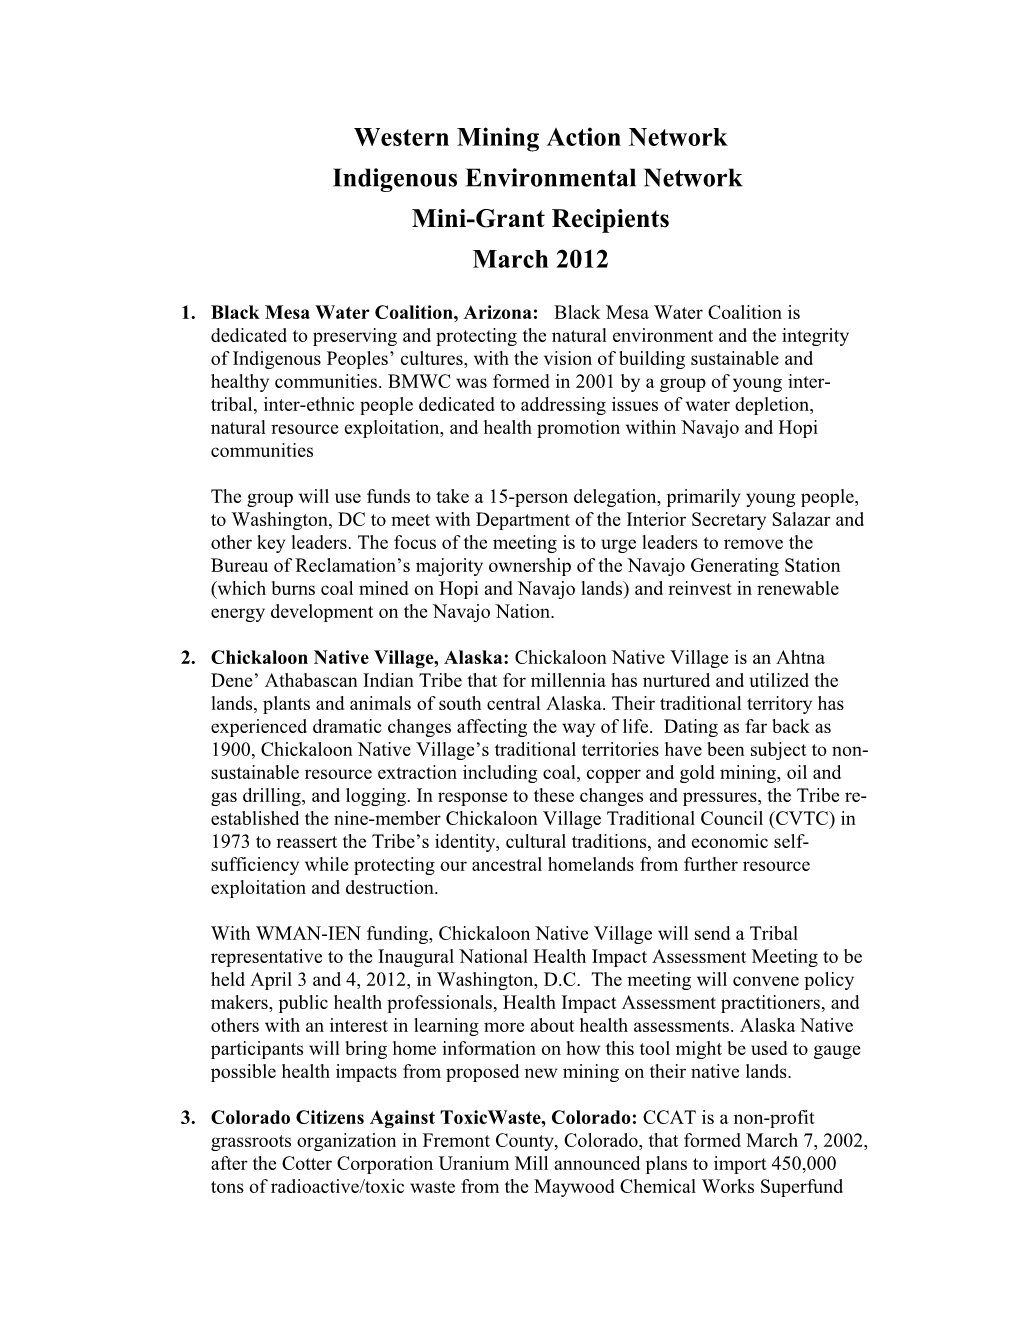 Western Mining Action Network Indigenous Environmental Network Mini-Grant Recipients